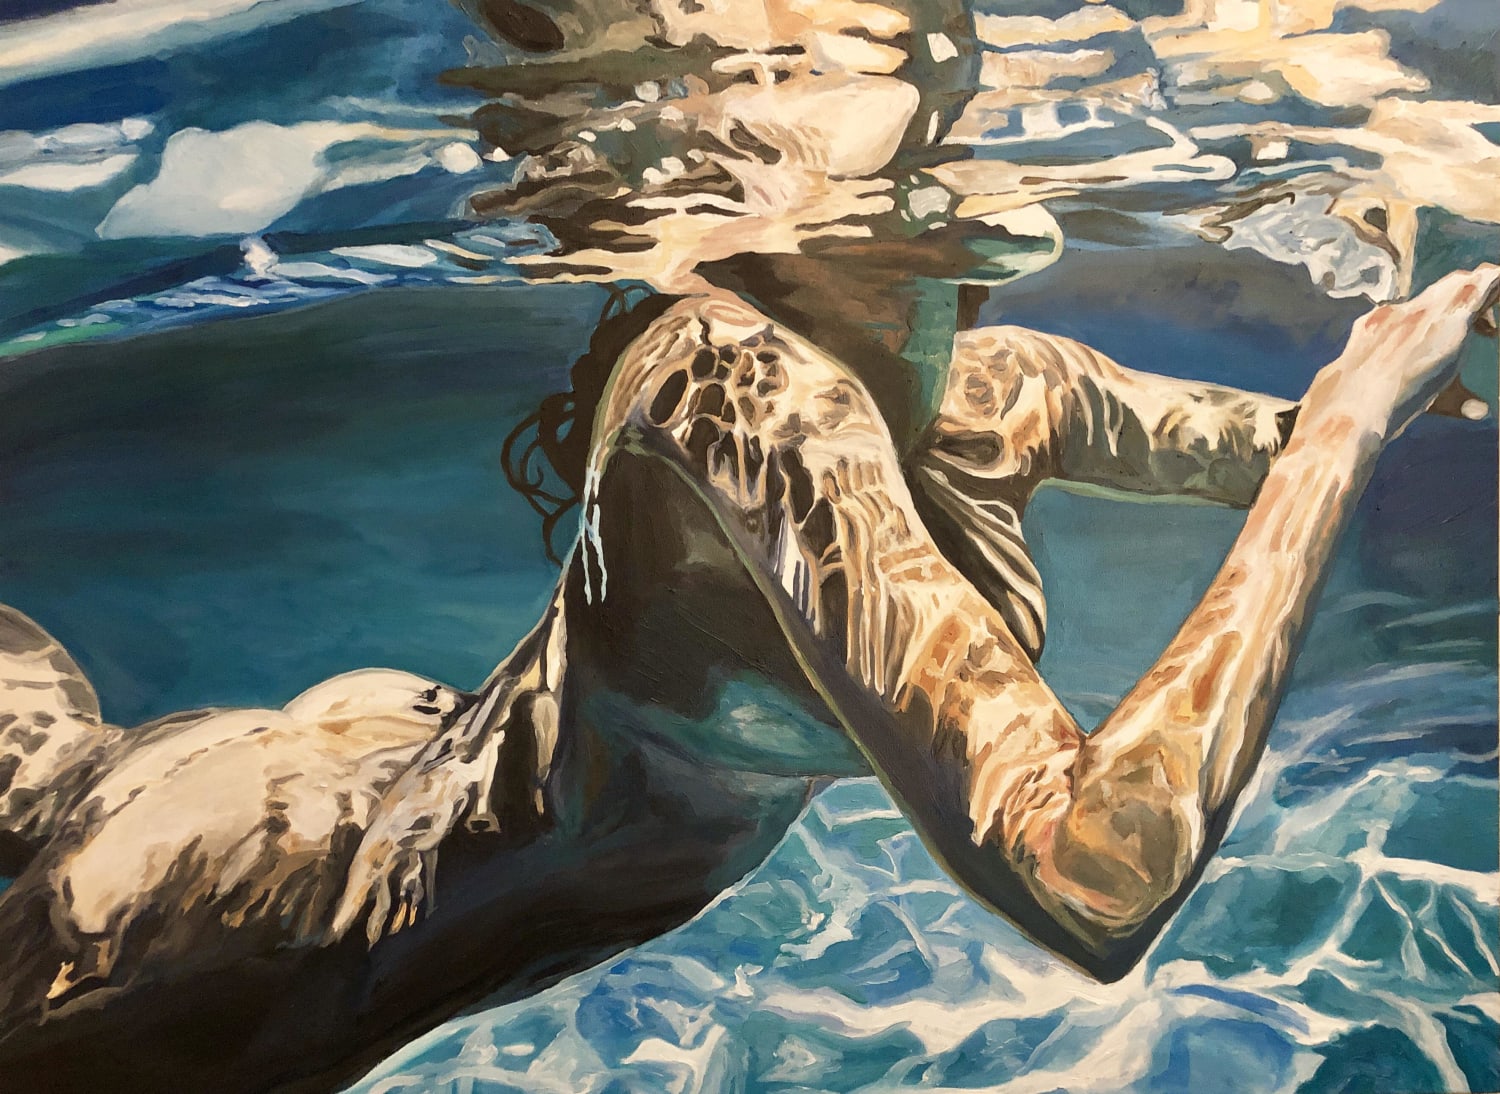 Float, me, oil on canvas, 2019